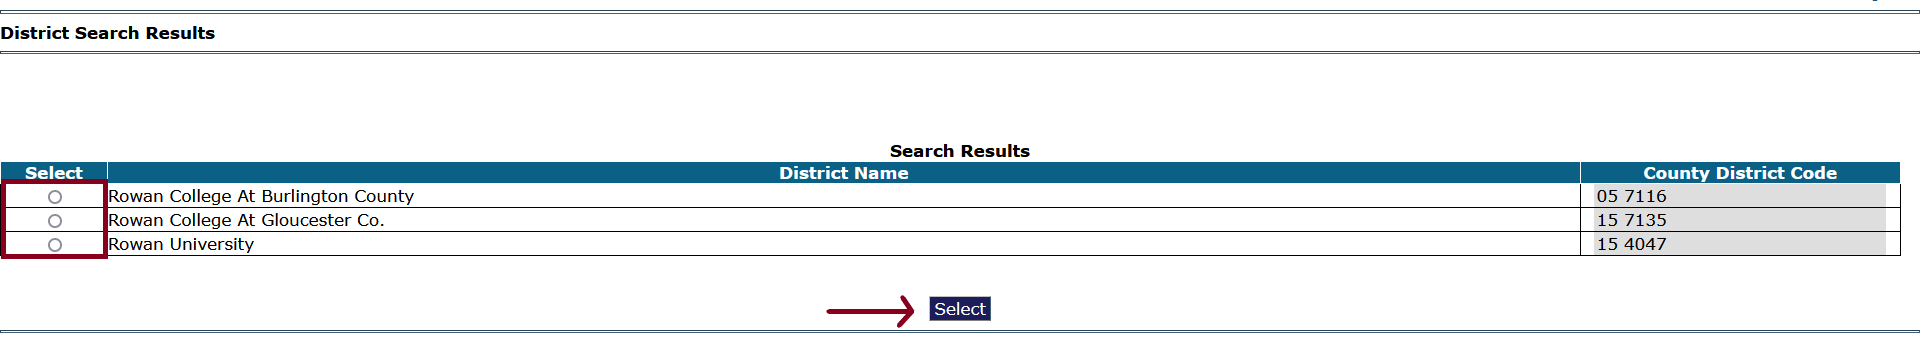 Screenshot: Search results for "Rowan." Three column table: select radio button, district name, and county district code. Select button.